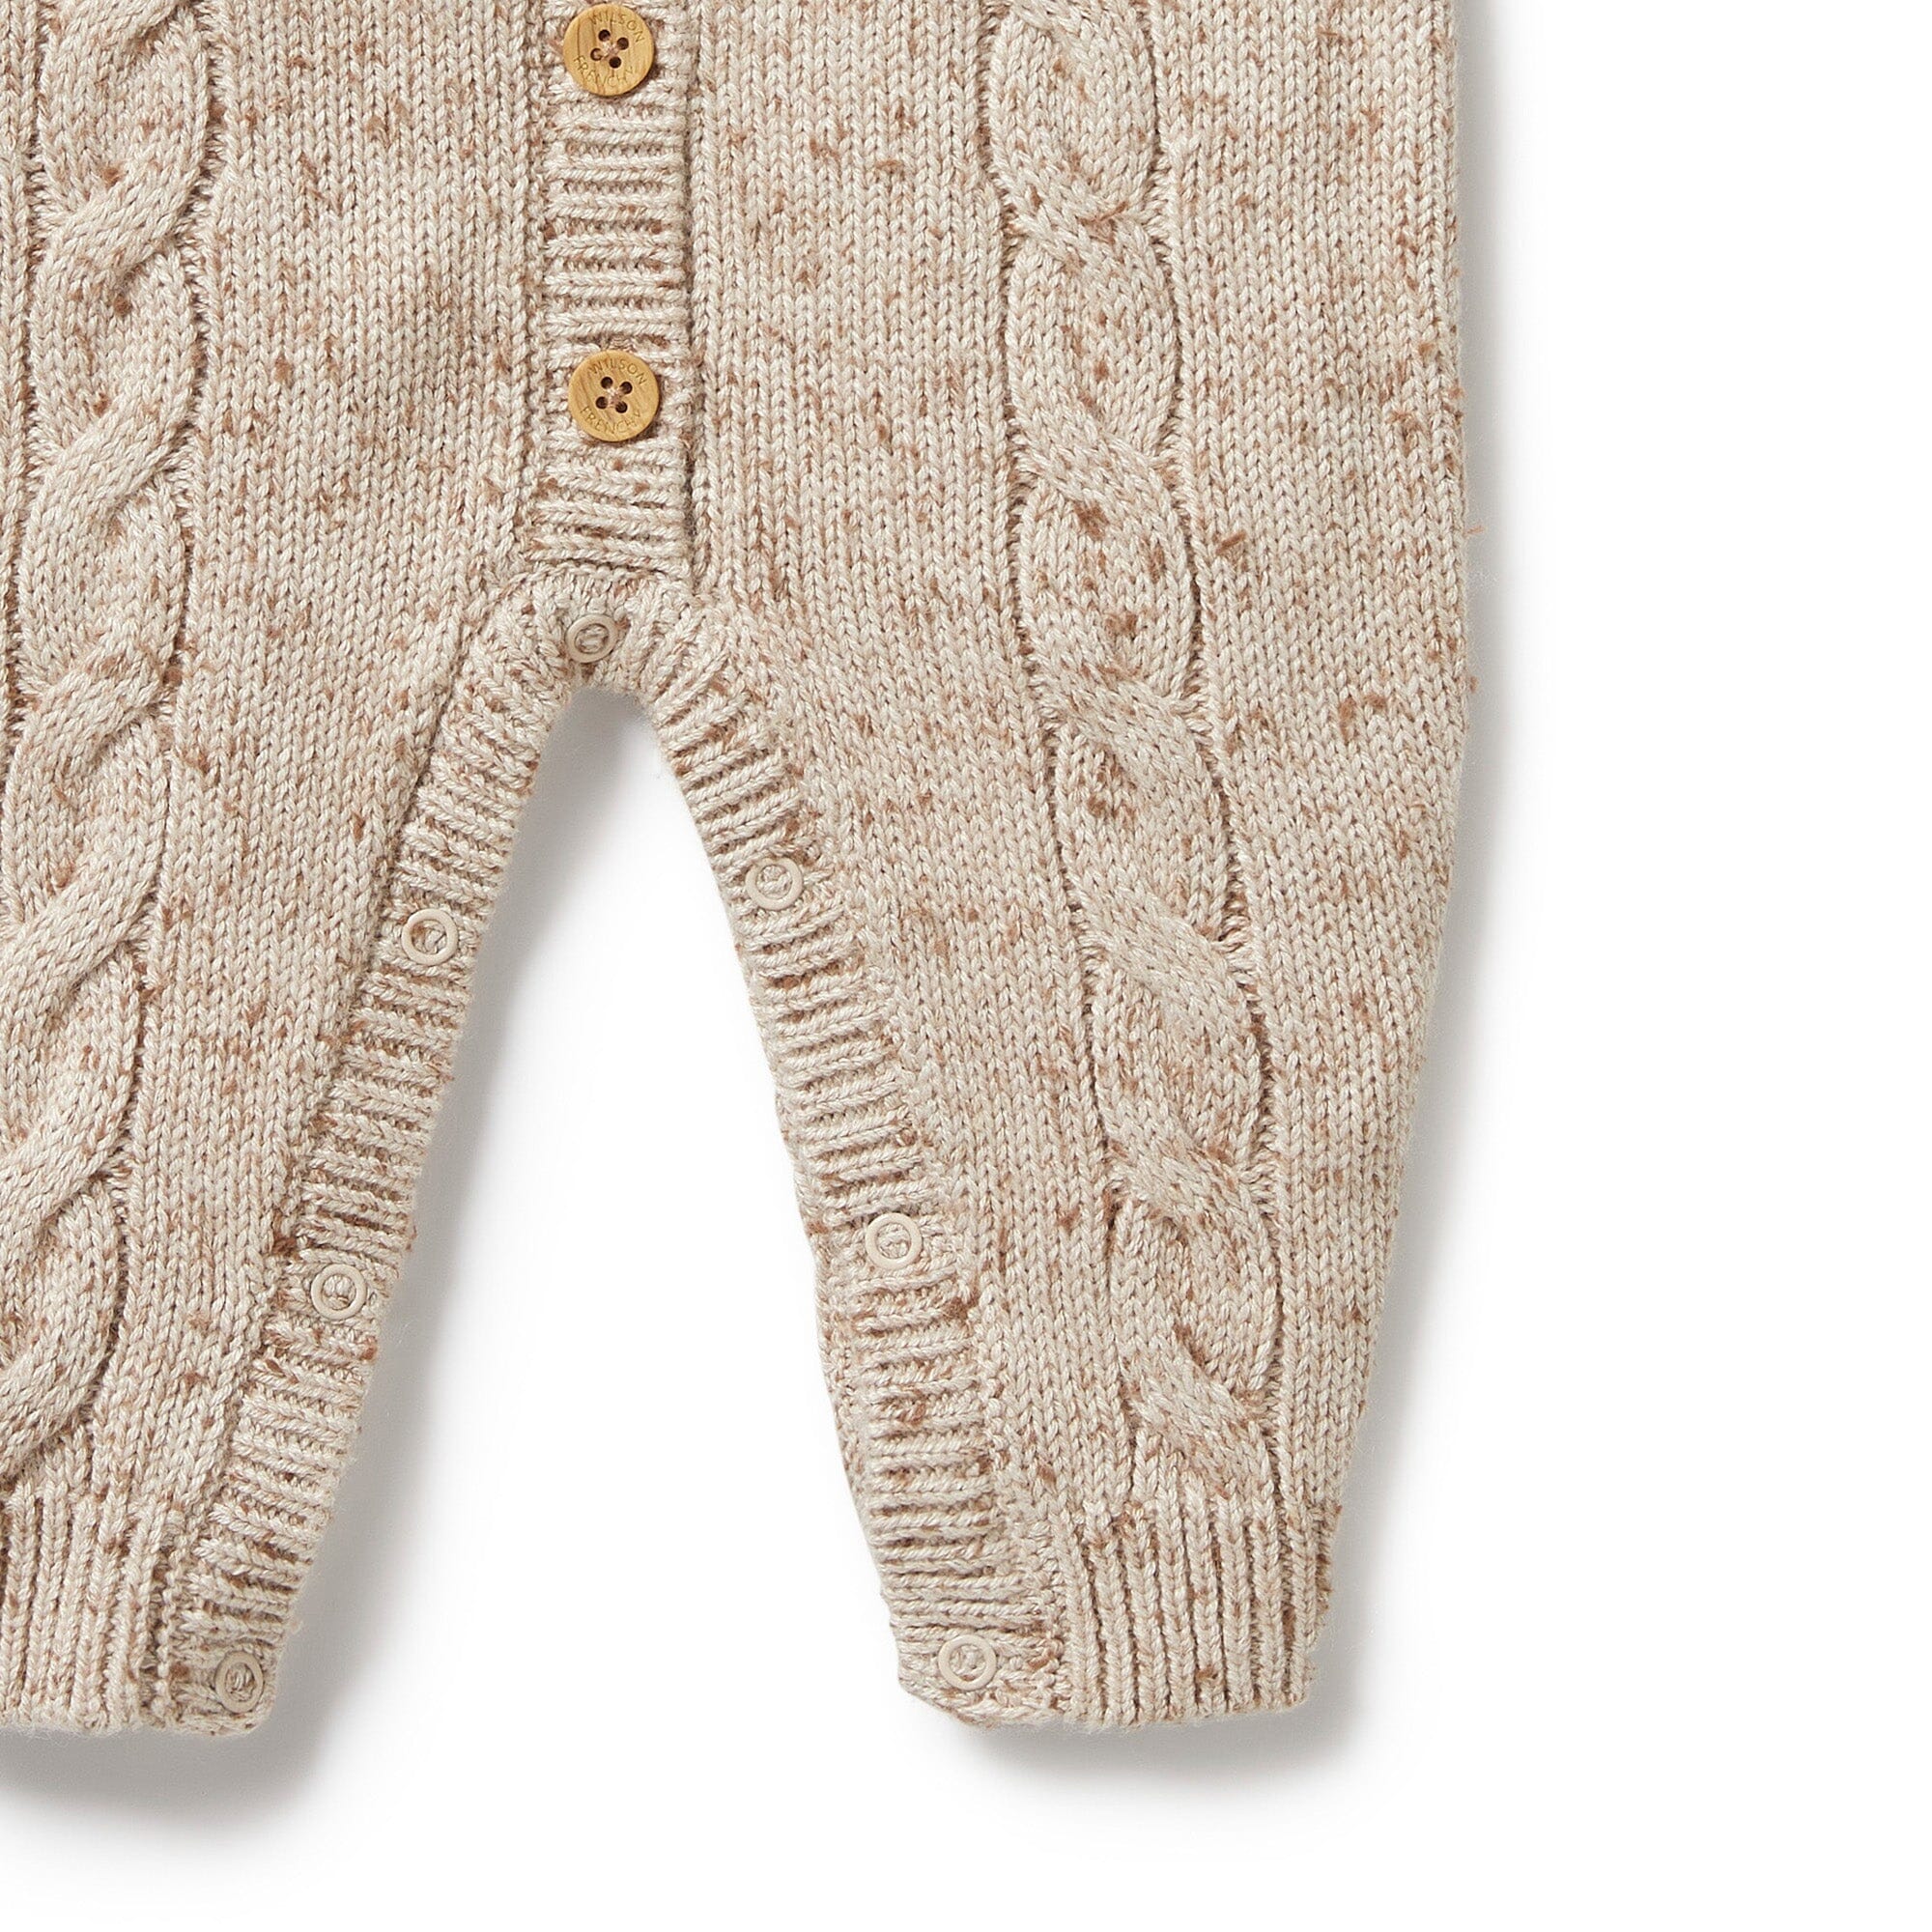 Wilson & Frenchy - Knitted Cable Growsuit - Almond Fleck Baby Wilson & Frenchy